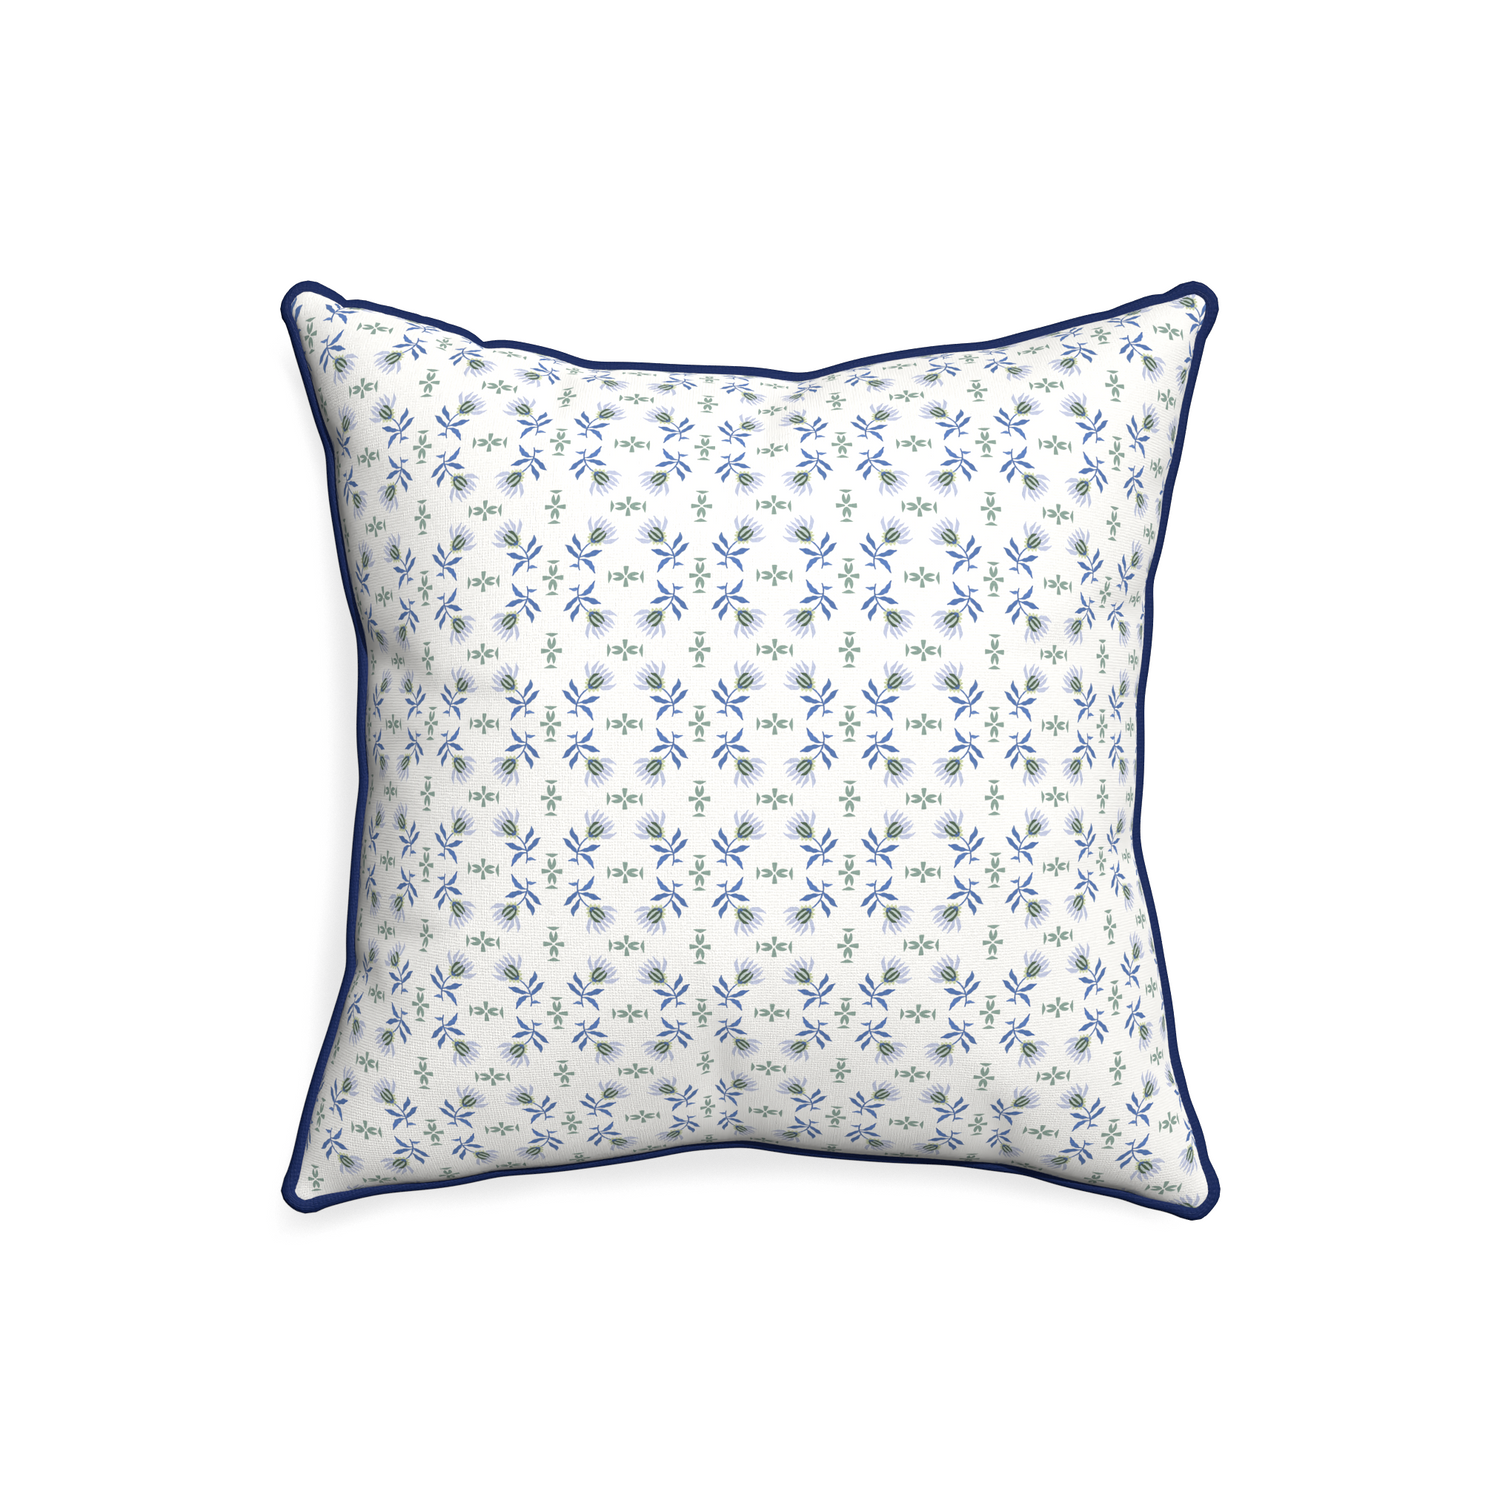 20-square lee custom pillow with midnight piping on white background